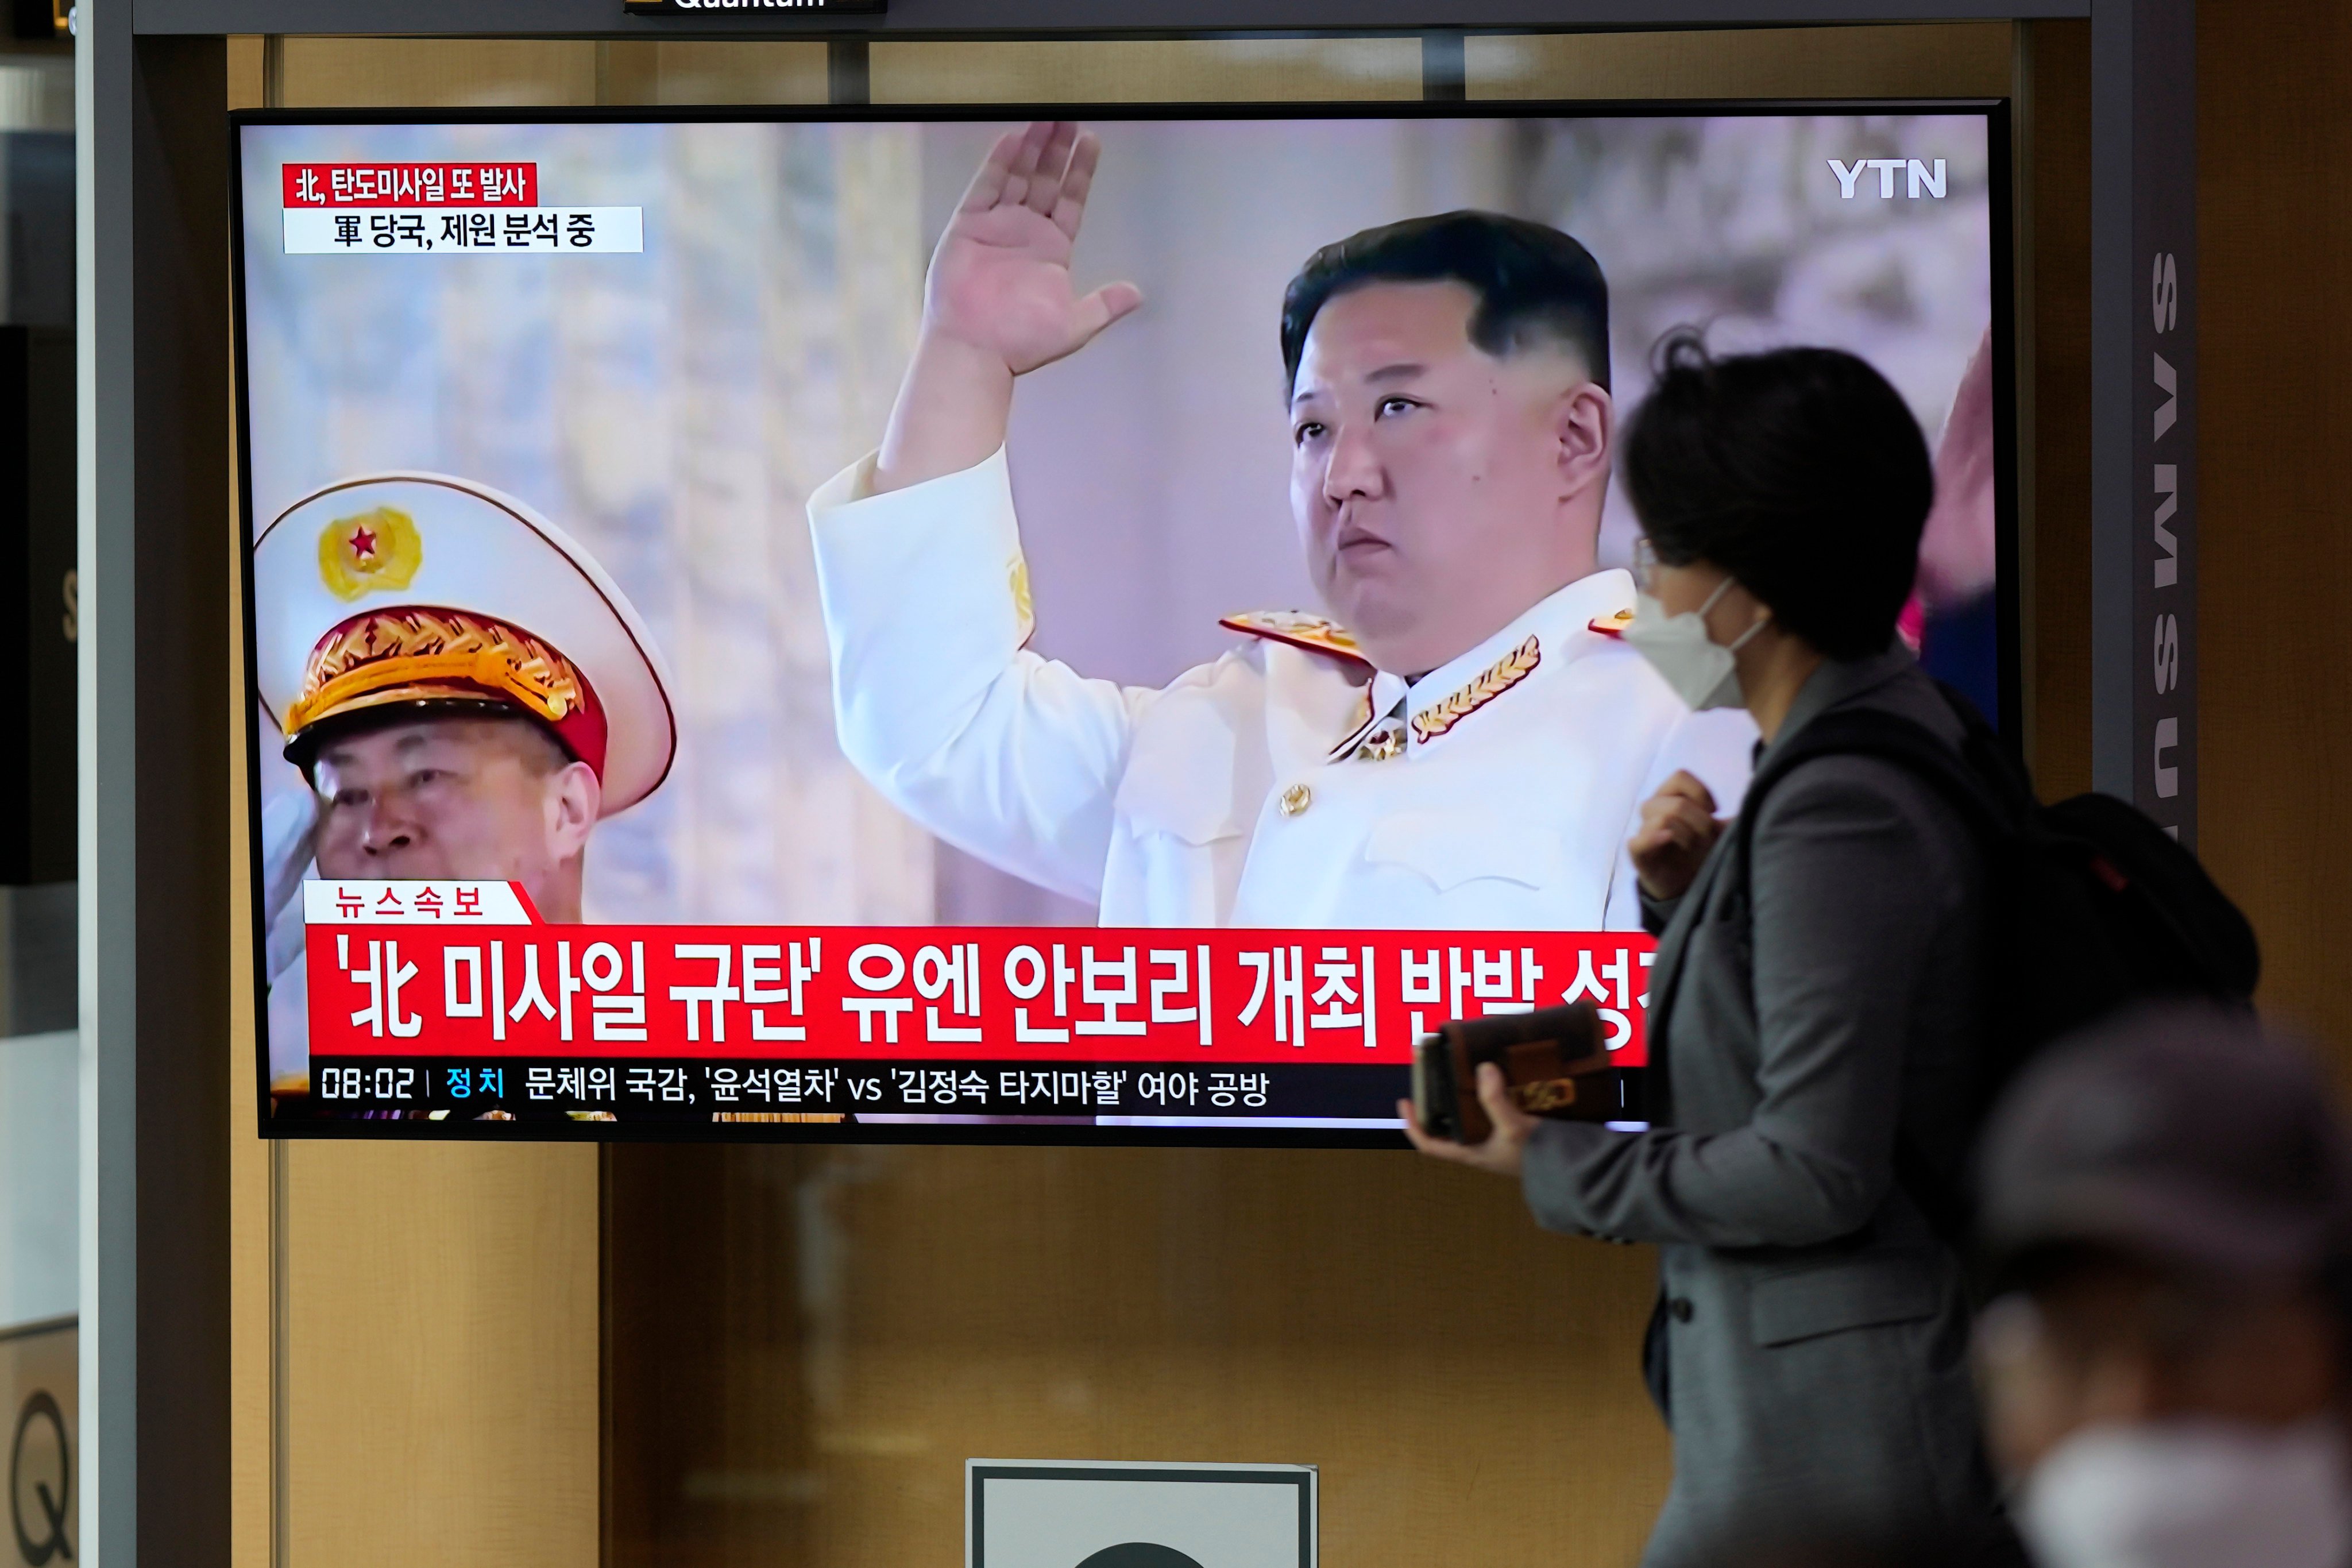 A TV screen showing news about North Korean leader Kim-Jong-un’s launch of a ballistic missile is seen at Seoul Railway Station in South Korea on October 6. Photo: AP